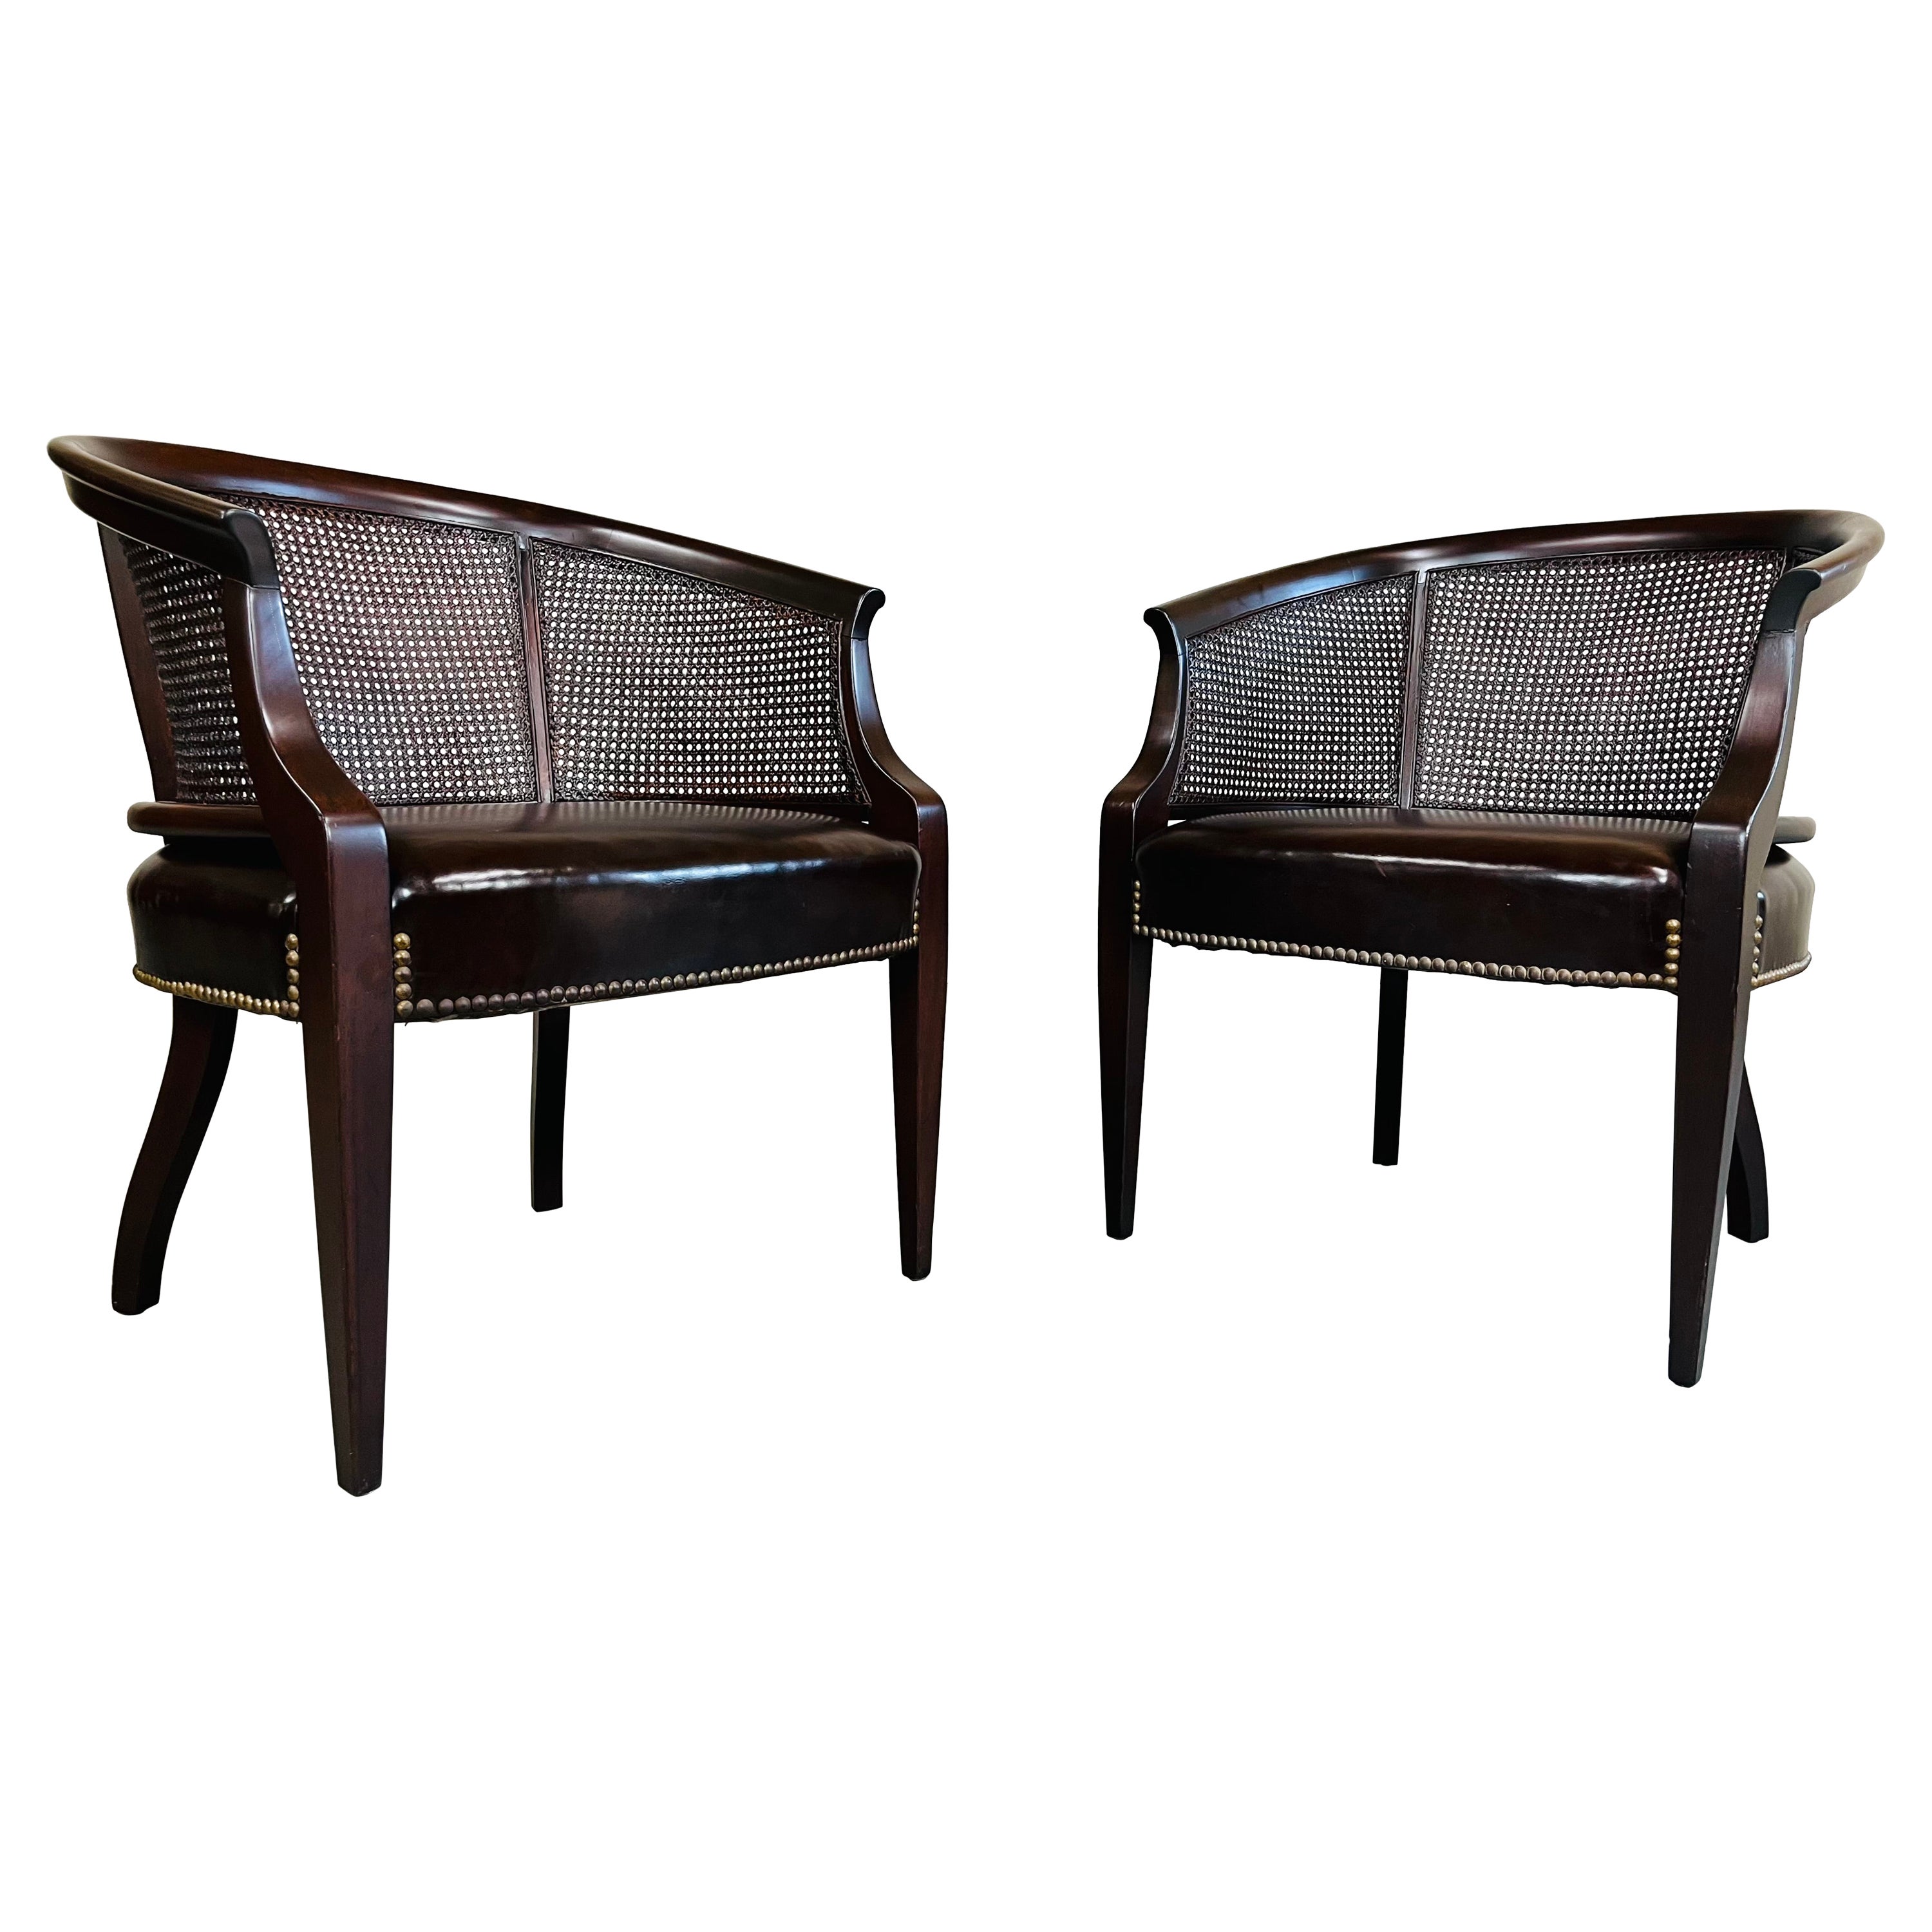 Pair of Regency Hickory Chair Co. Cane Barrel Back Club Chairs Having Lithe Legs